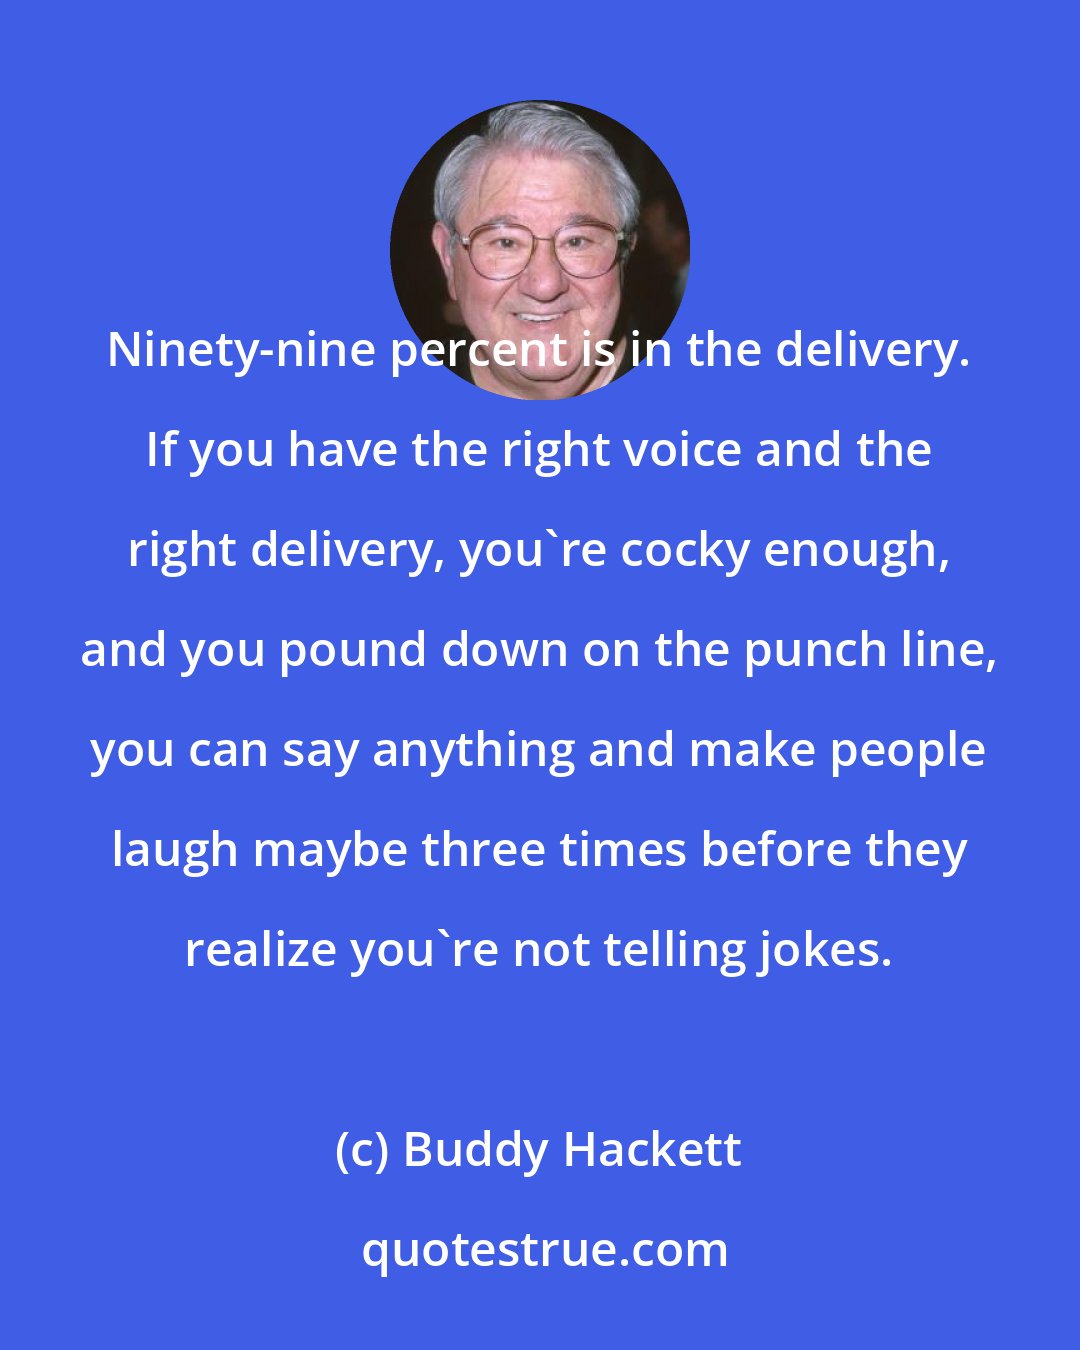 Buddy Hackett: Ninety-nine percent is in the delivery. If you have the right voice and the right delivery, you're cocky enough, and you pound down on the punch line, you can say anything and make people laugh maybe three times before they realize you're not telling jokes.